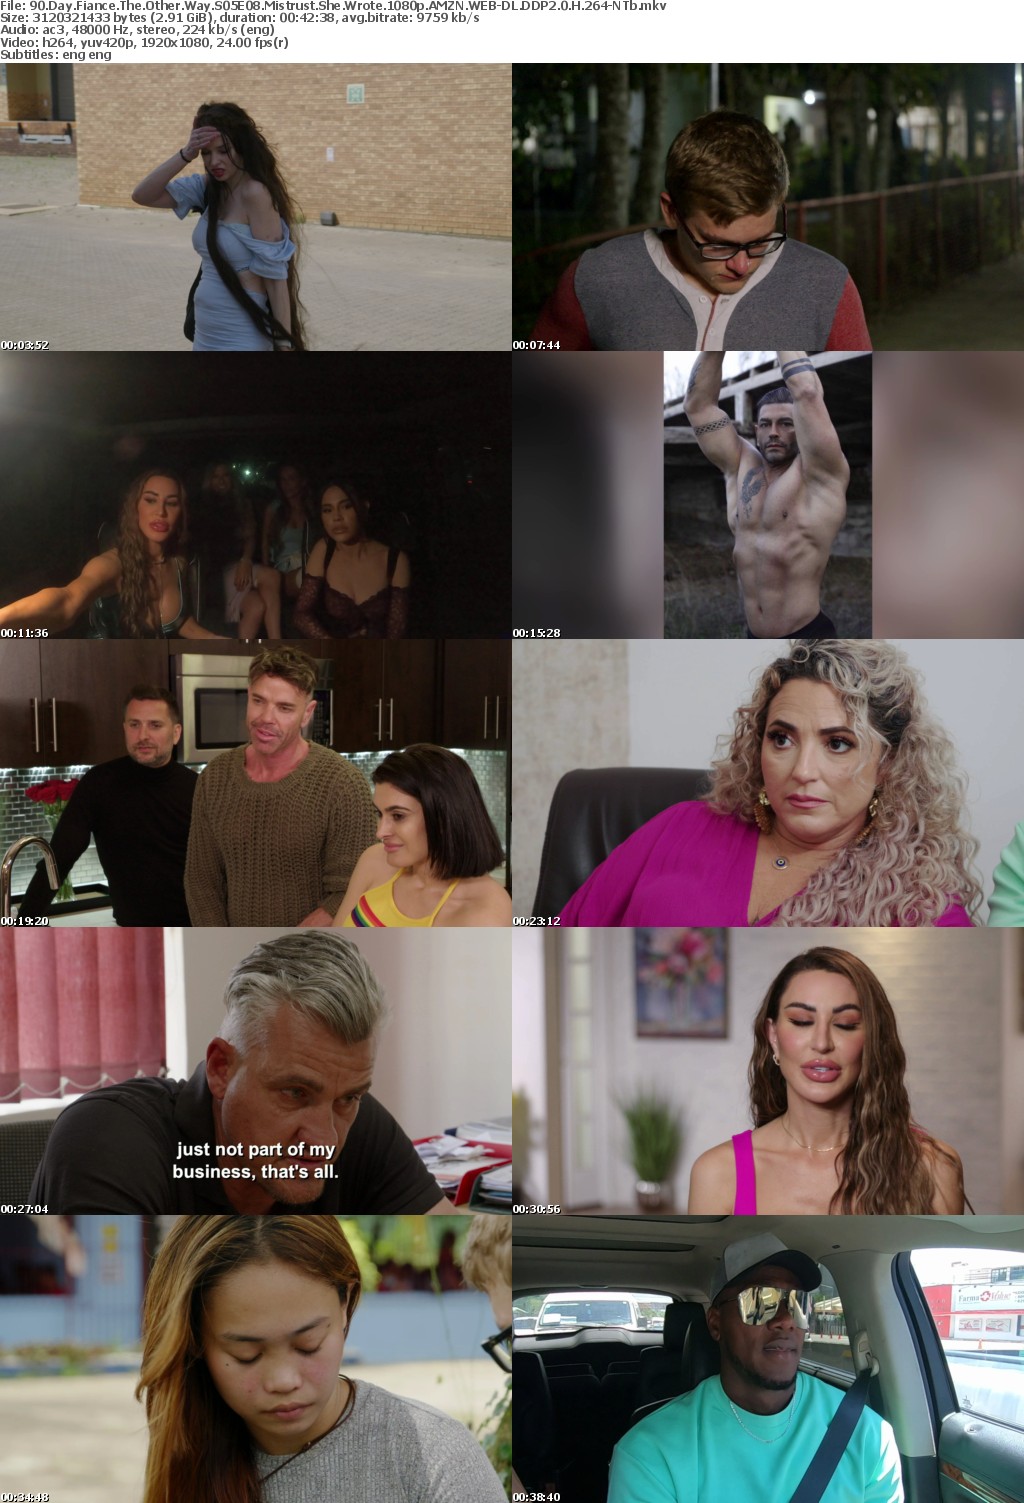 90 Day Fiance The Other Way S05E08 Mistrust She Wrote 1080p AMZN WEB-DL DDP2 0 H 264-NTb